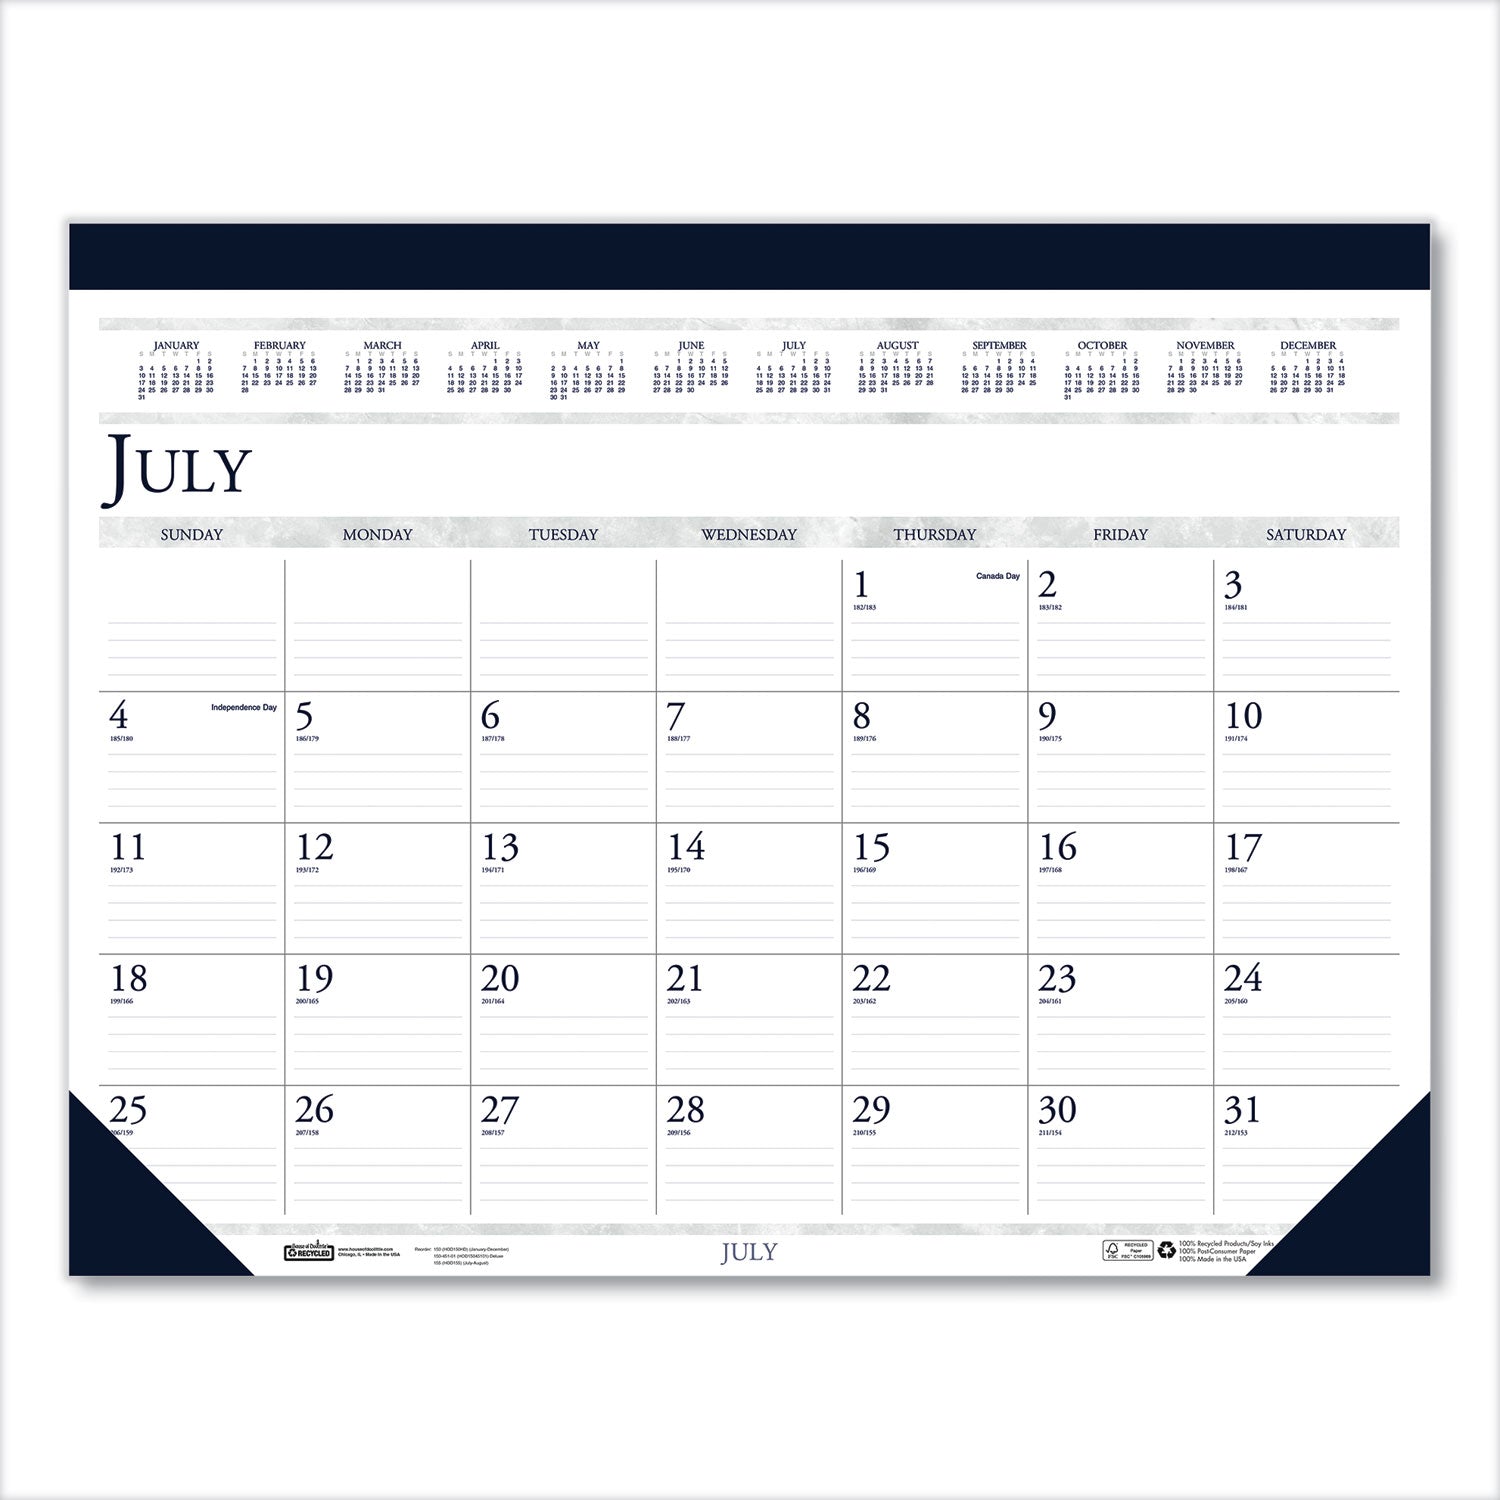 recycled-academic-desk-pad-calendar-185-x-13-white-blue-sheets-blue-binding-corners-14-month-july-to-aug-2023-to-2024_hod1556 - 1